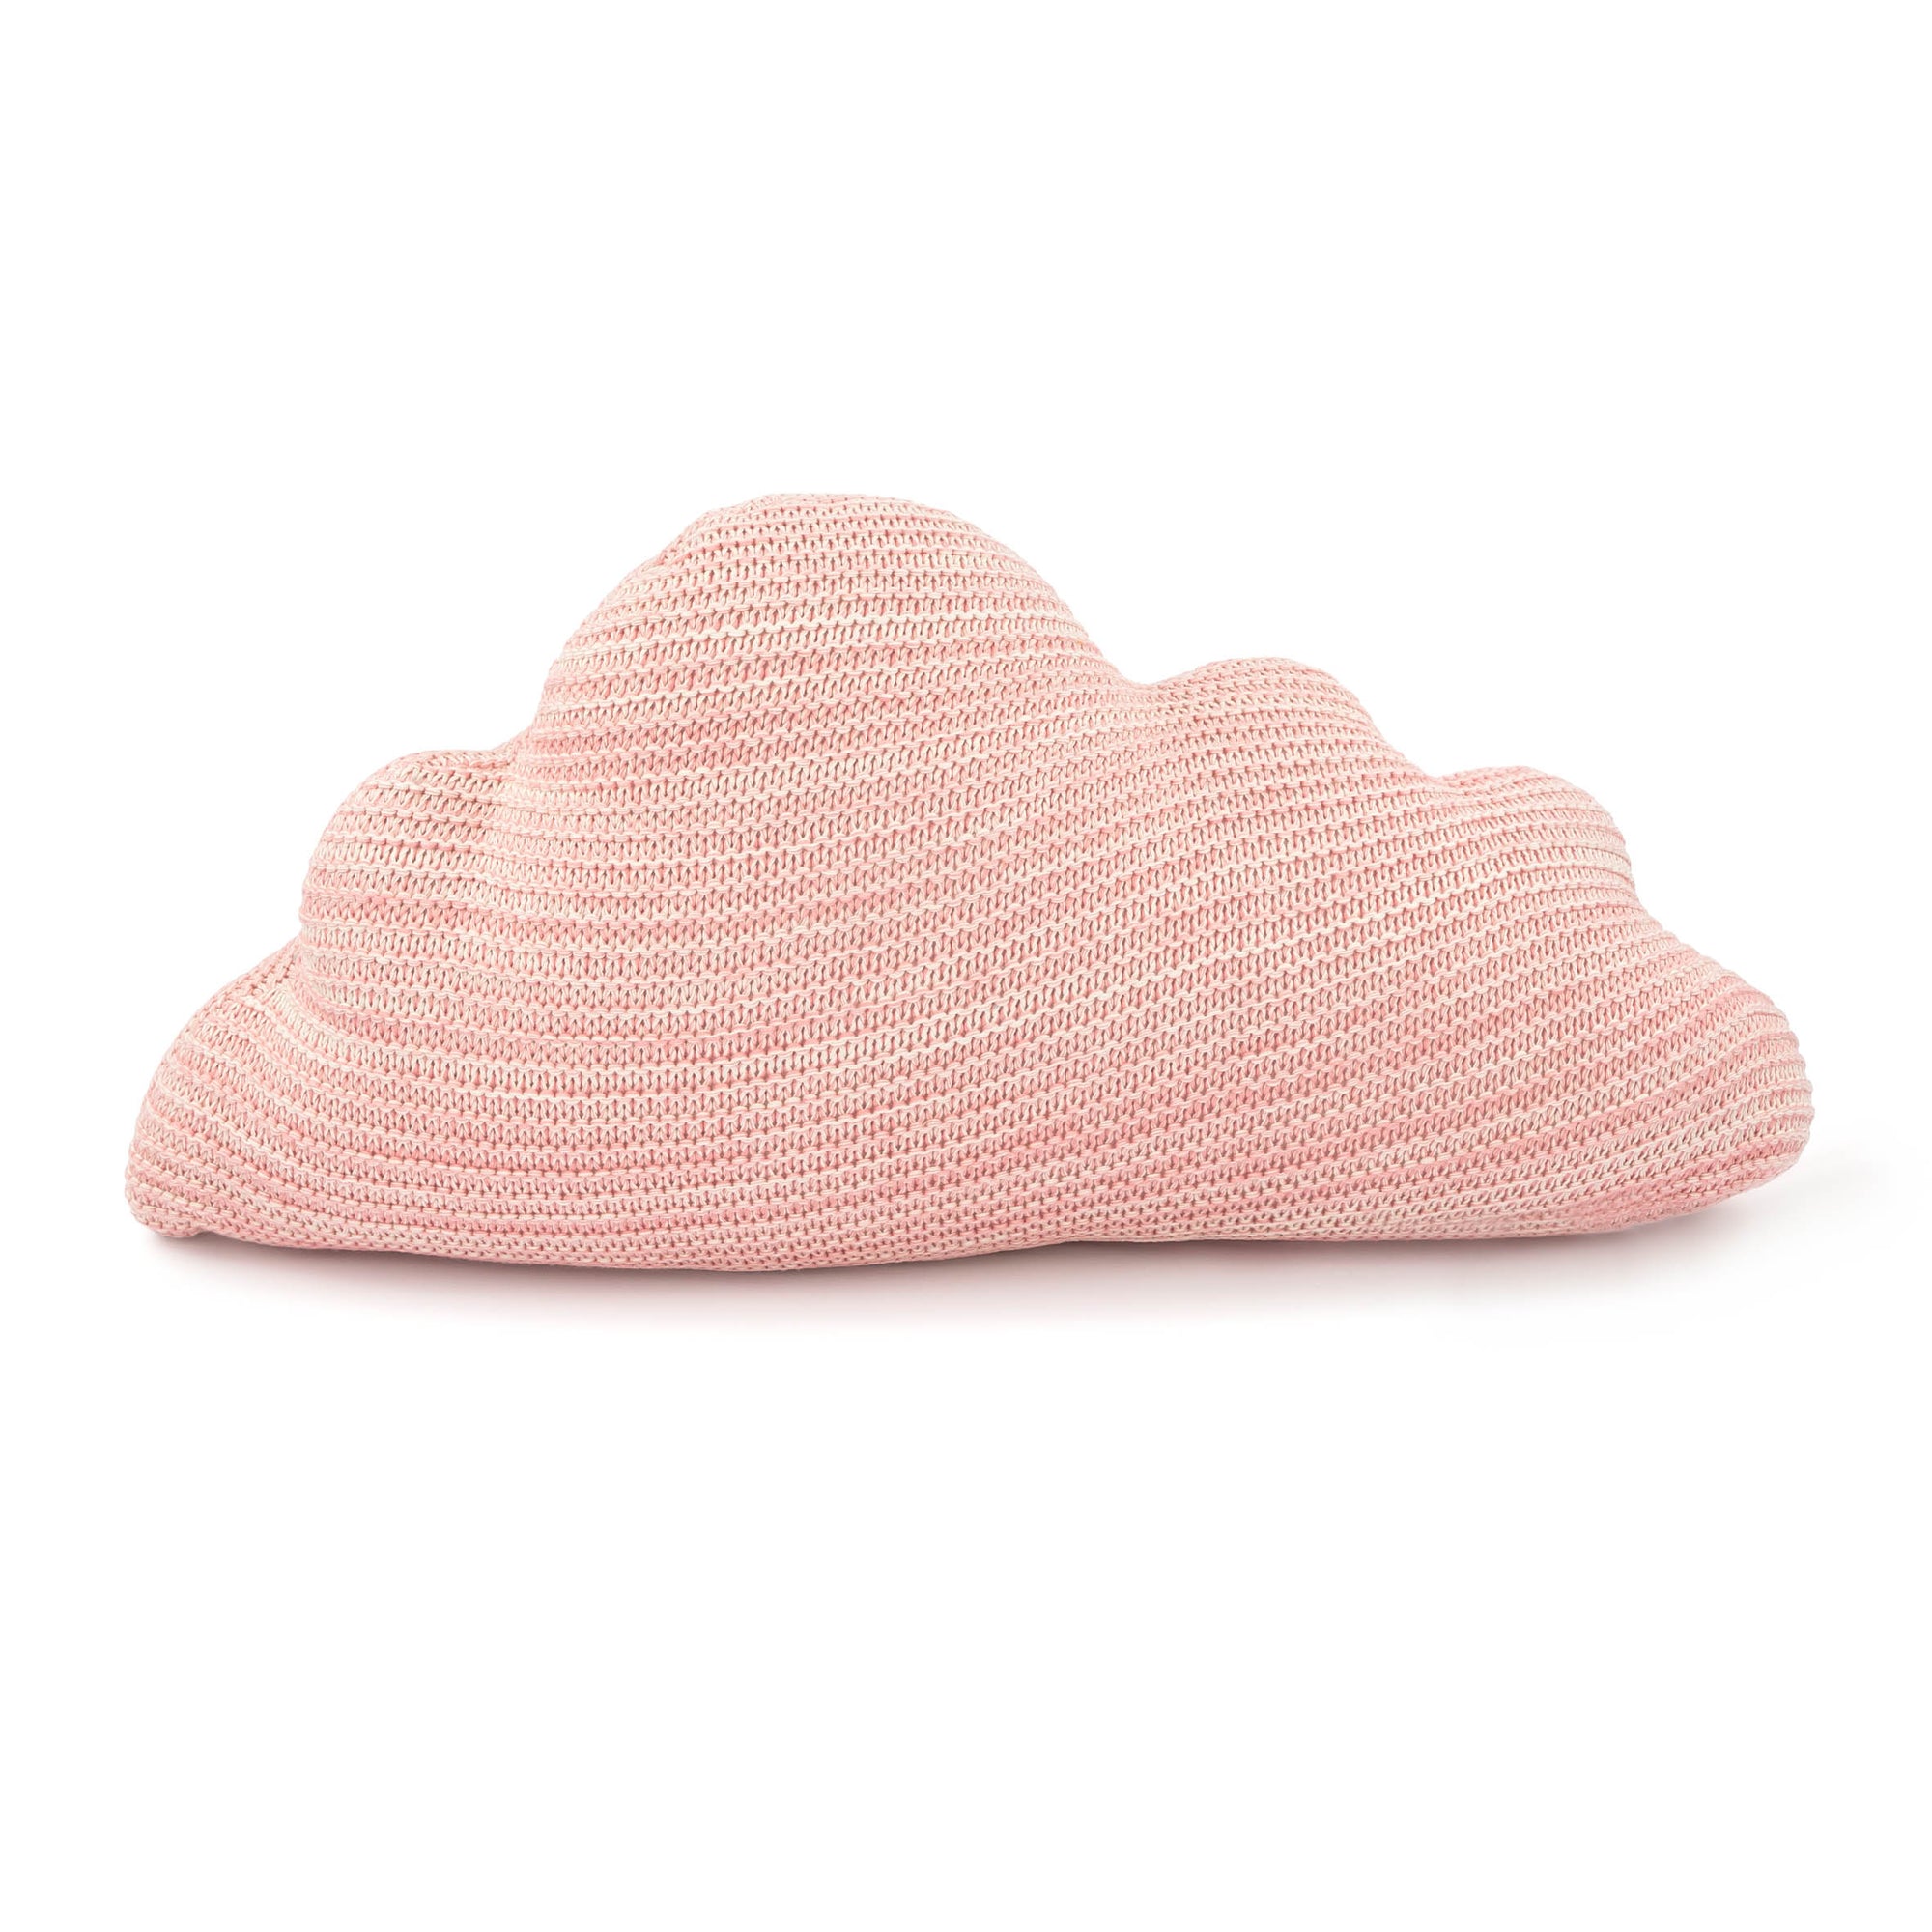 Saturday Park Pink Knitted Cloud Pillow